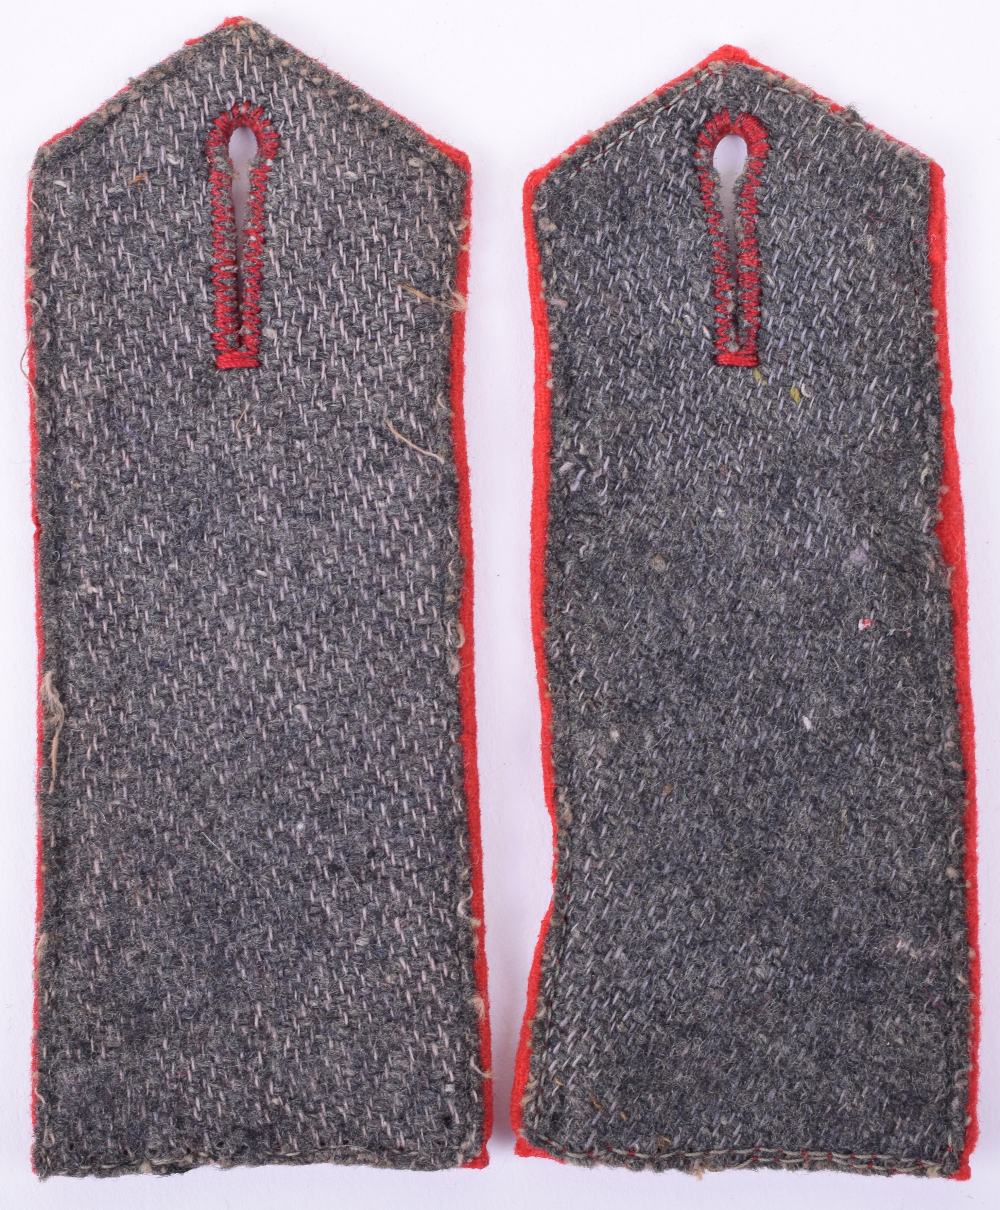 Matched Pair of Field Artillery Regiment 594 Field Grey Tunic Shoulder Boards - Image 2 of 2